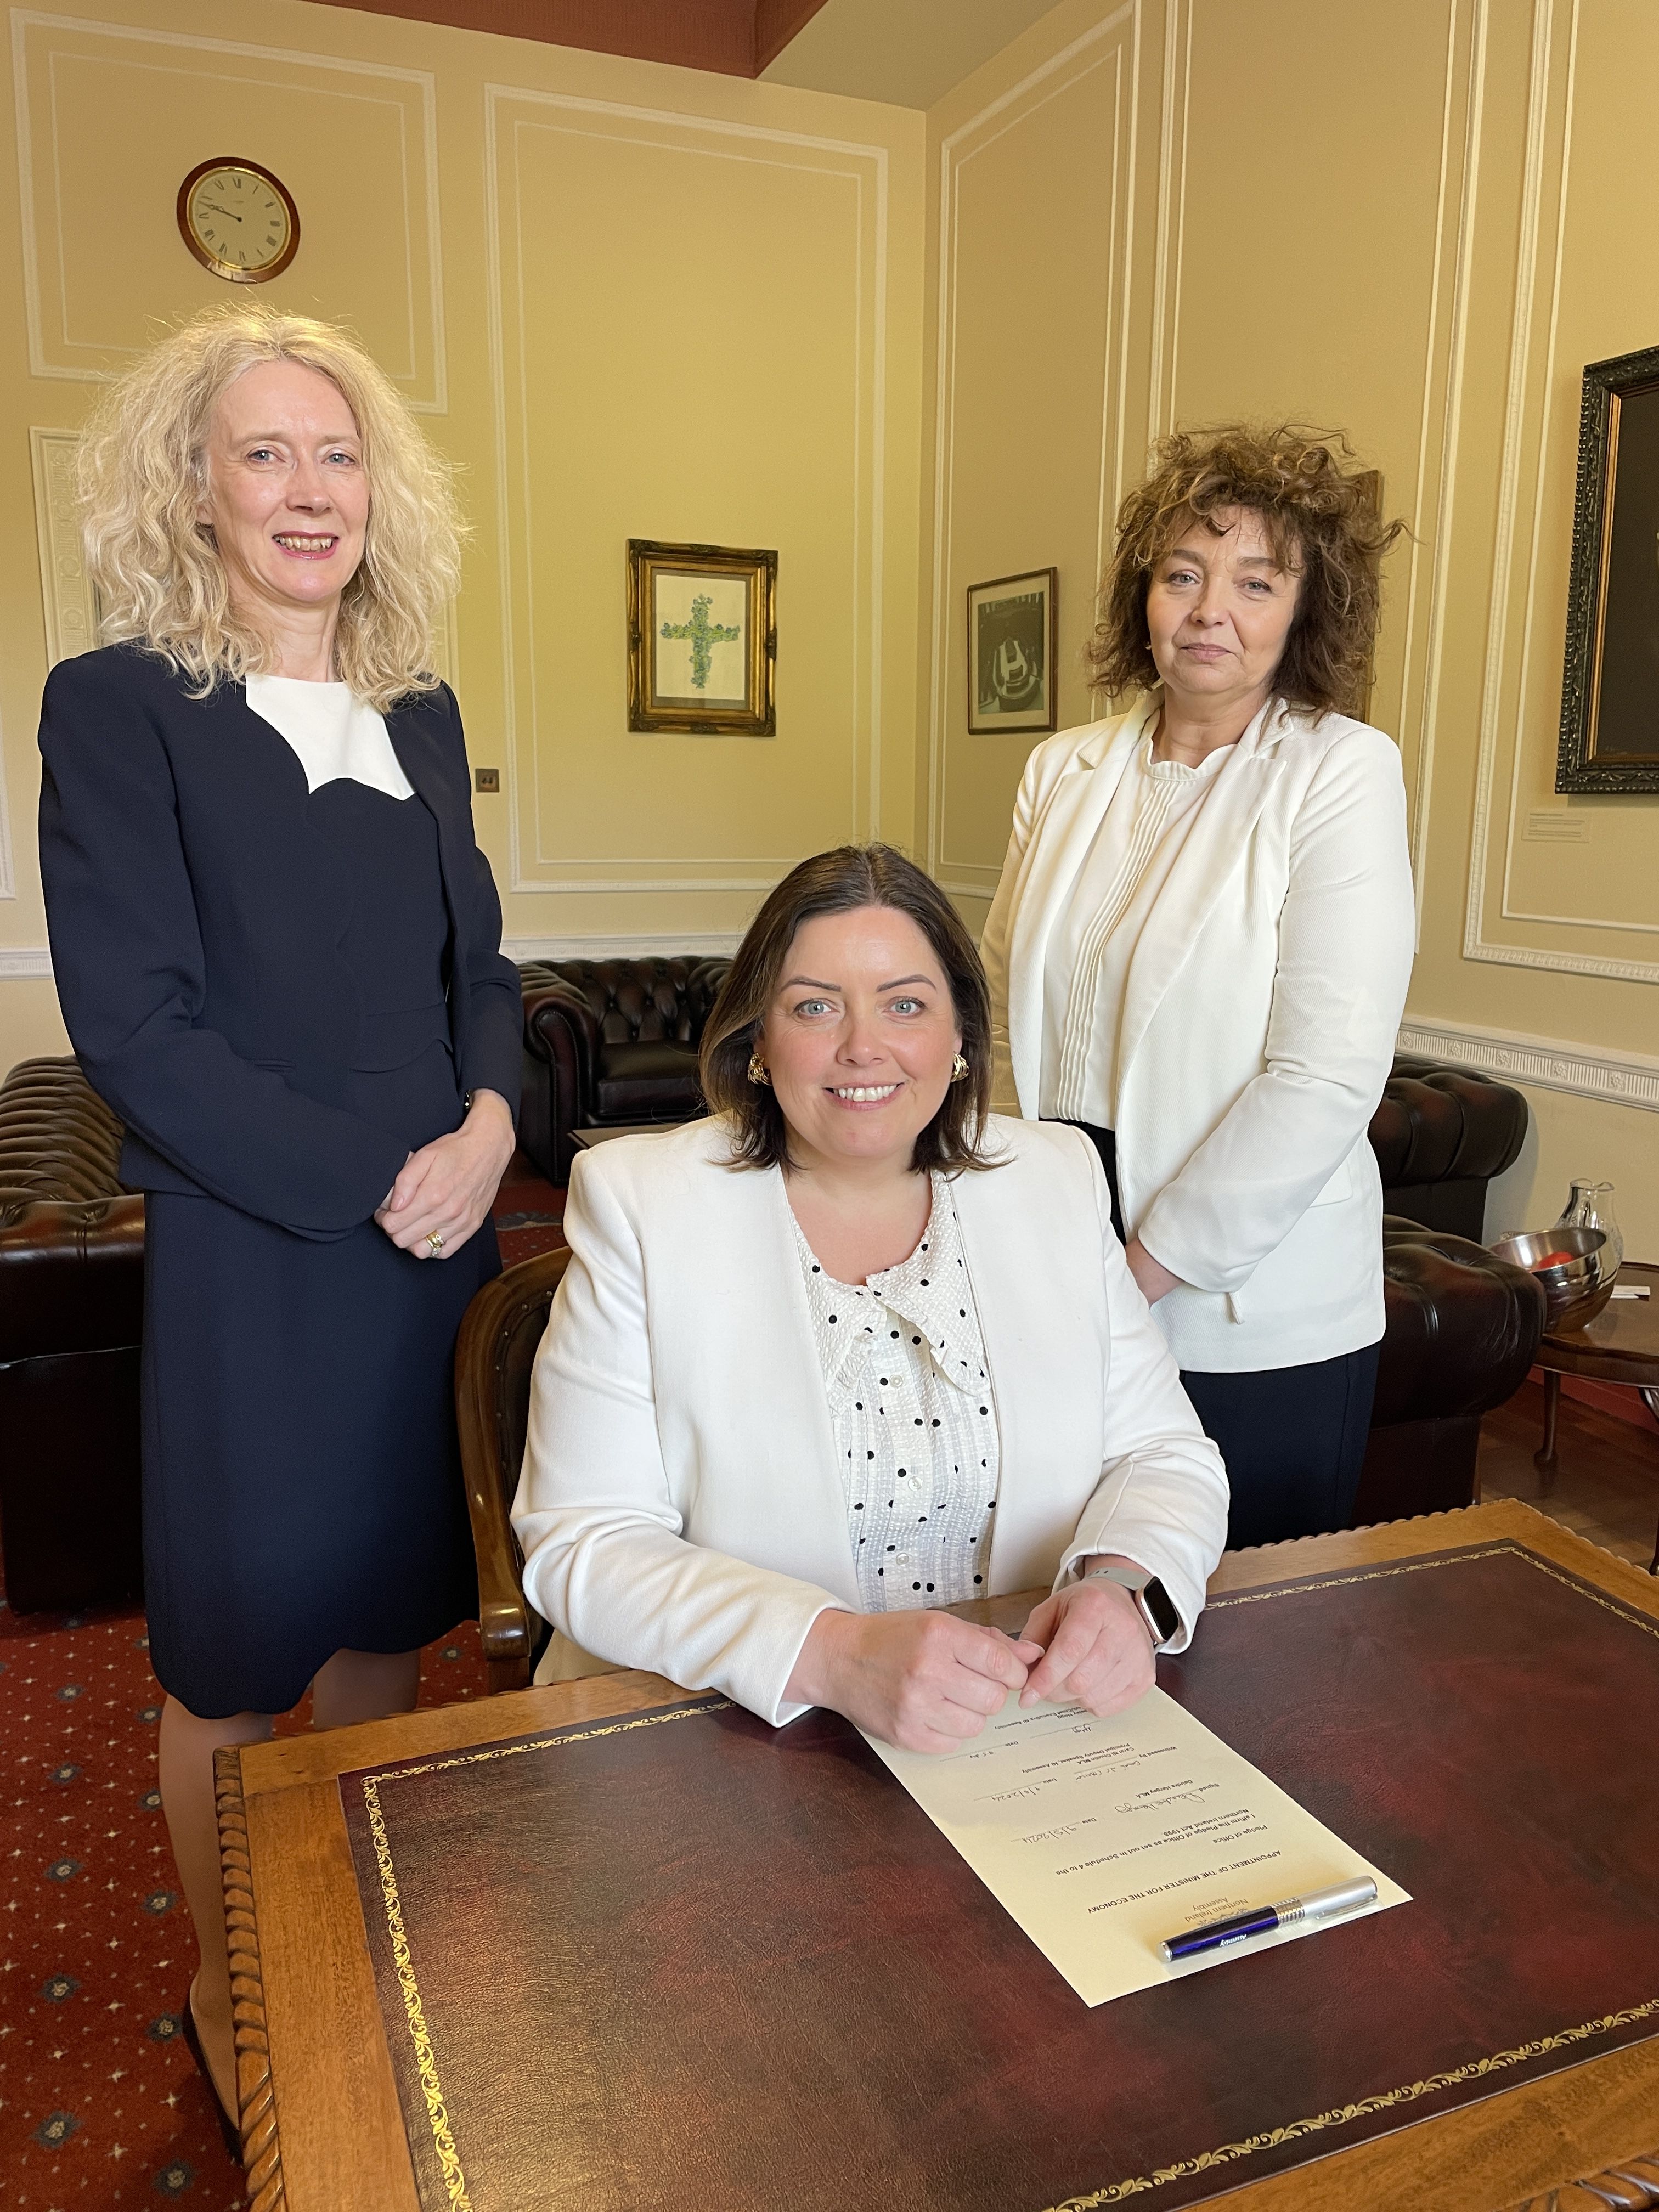 STEPPING IN: South Belfast MLA Deirdre Hargey takes up her post as interim Economy Minister